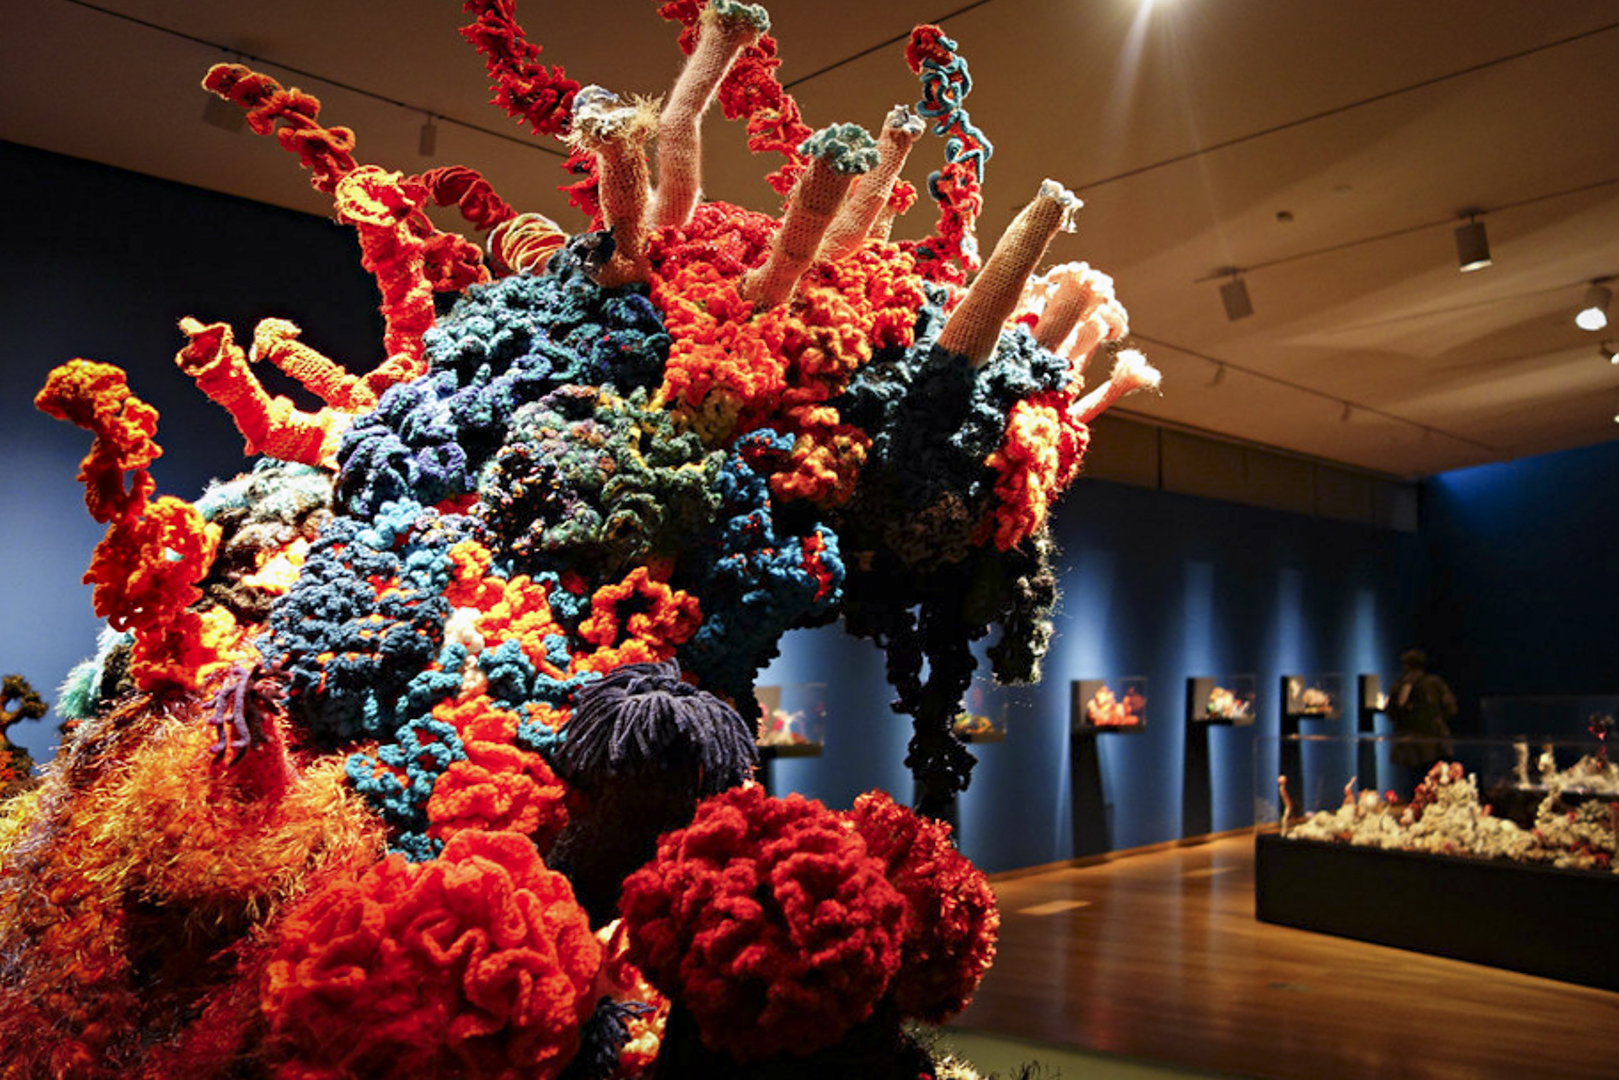 Crochet Coral Reef: TOXIC SEAS, Museum of Arts and Design, NYC 2016 (by Allison Meier CC BY 2.0 DEED via Flickr).